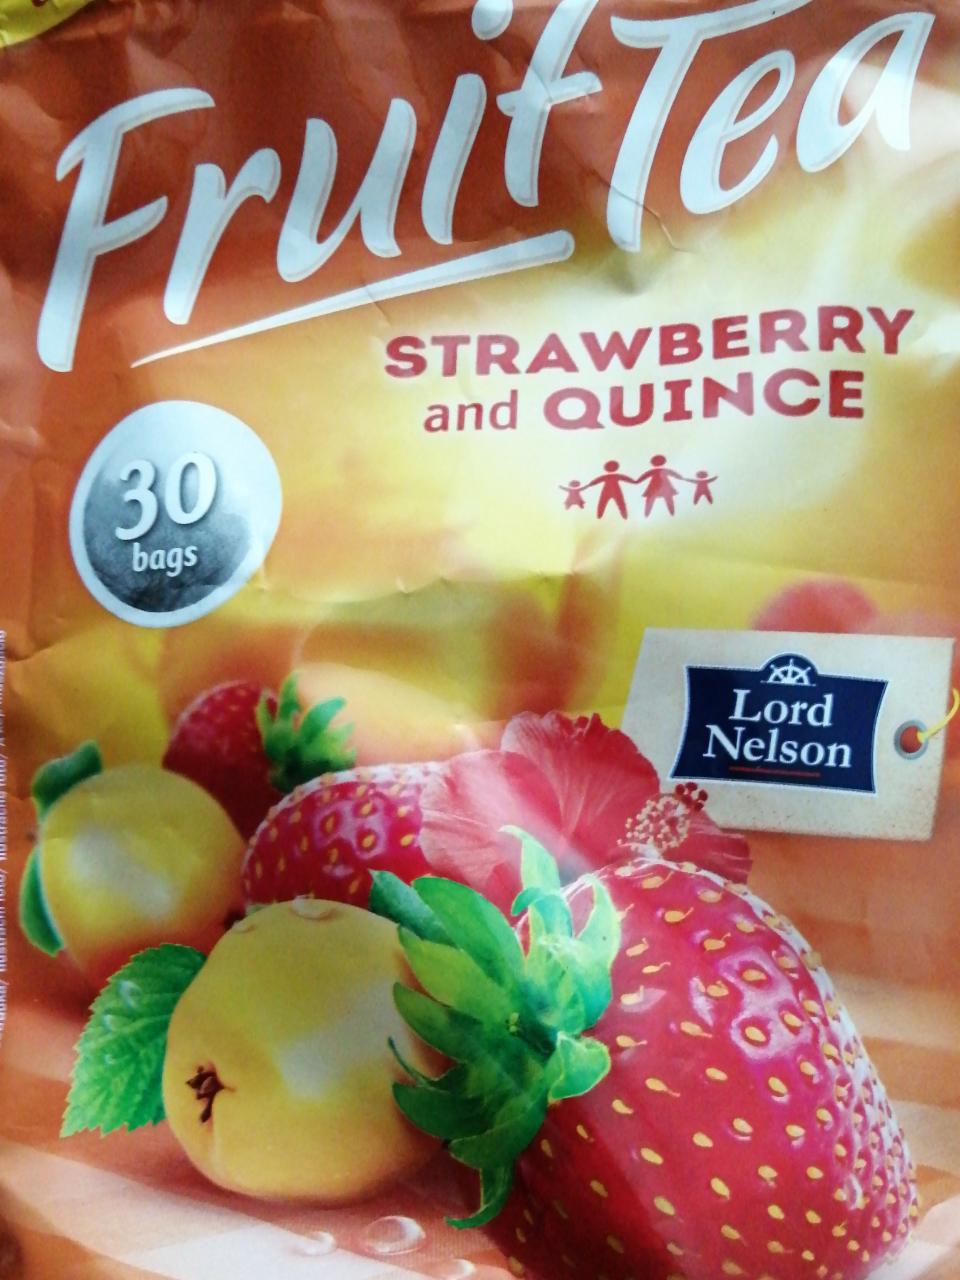 Fotografie - Fruit Tea Strawberry and Quince Lord Nelson